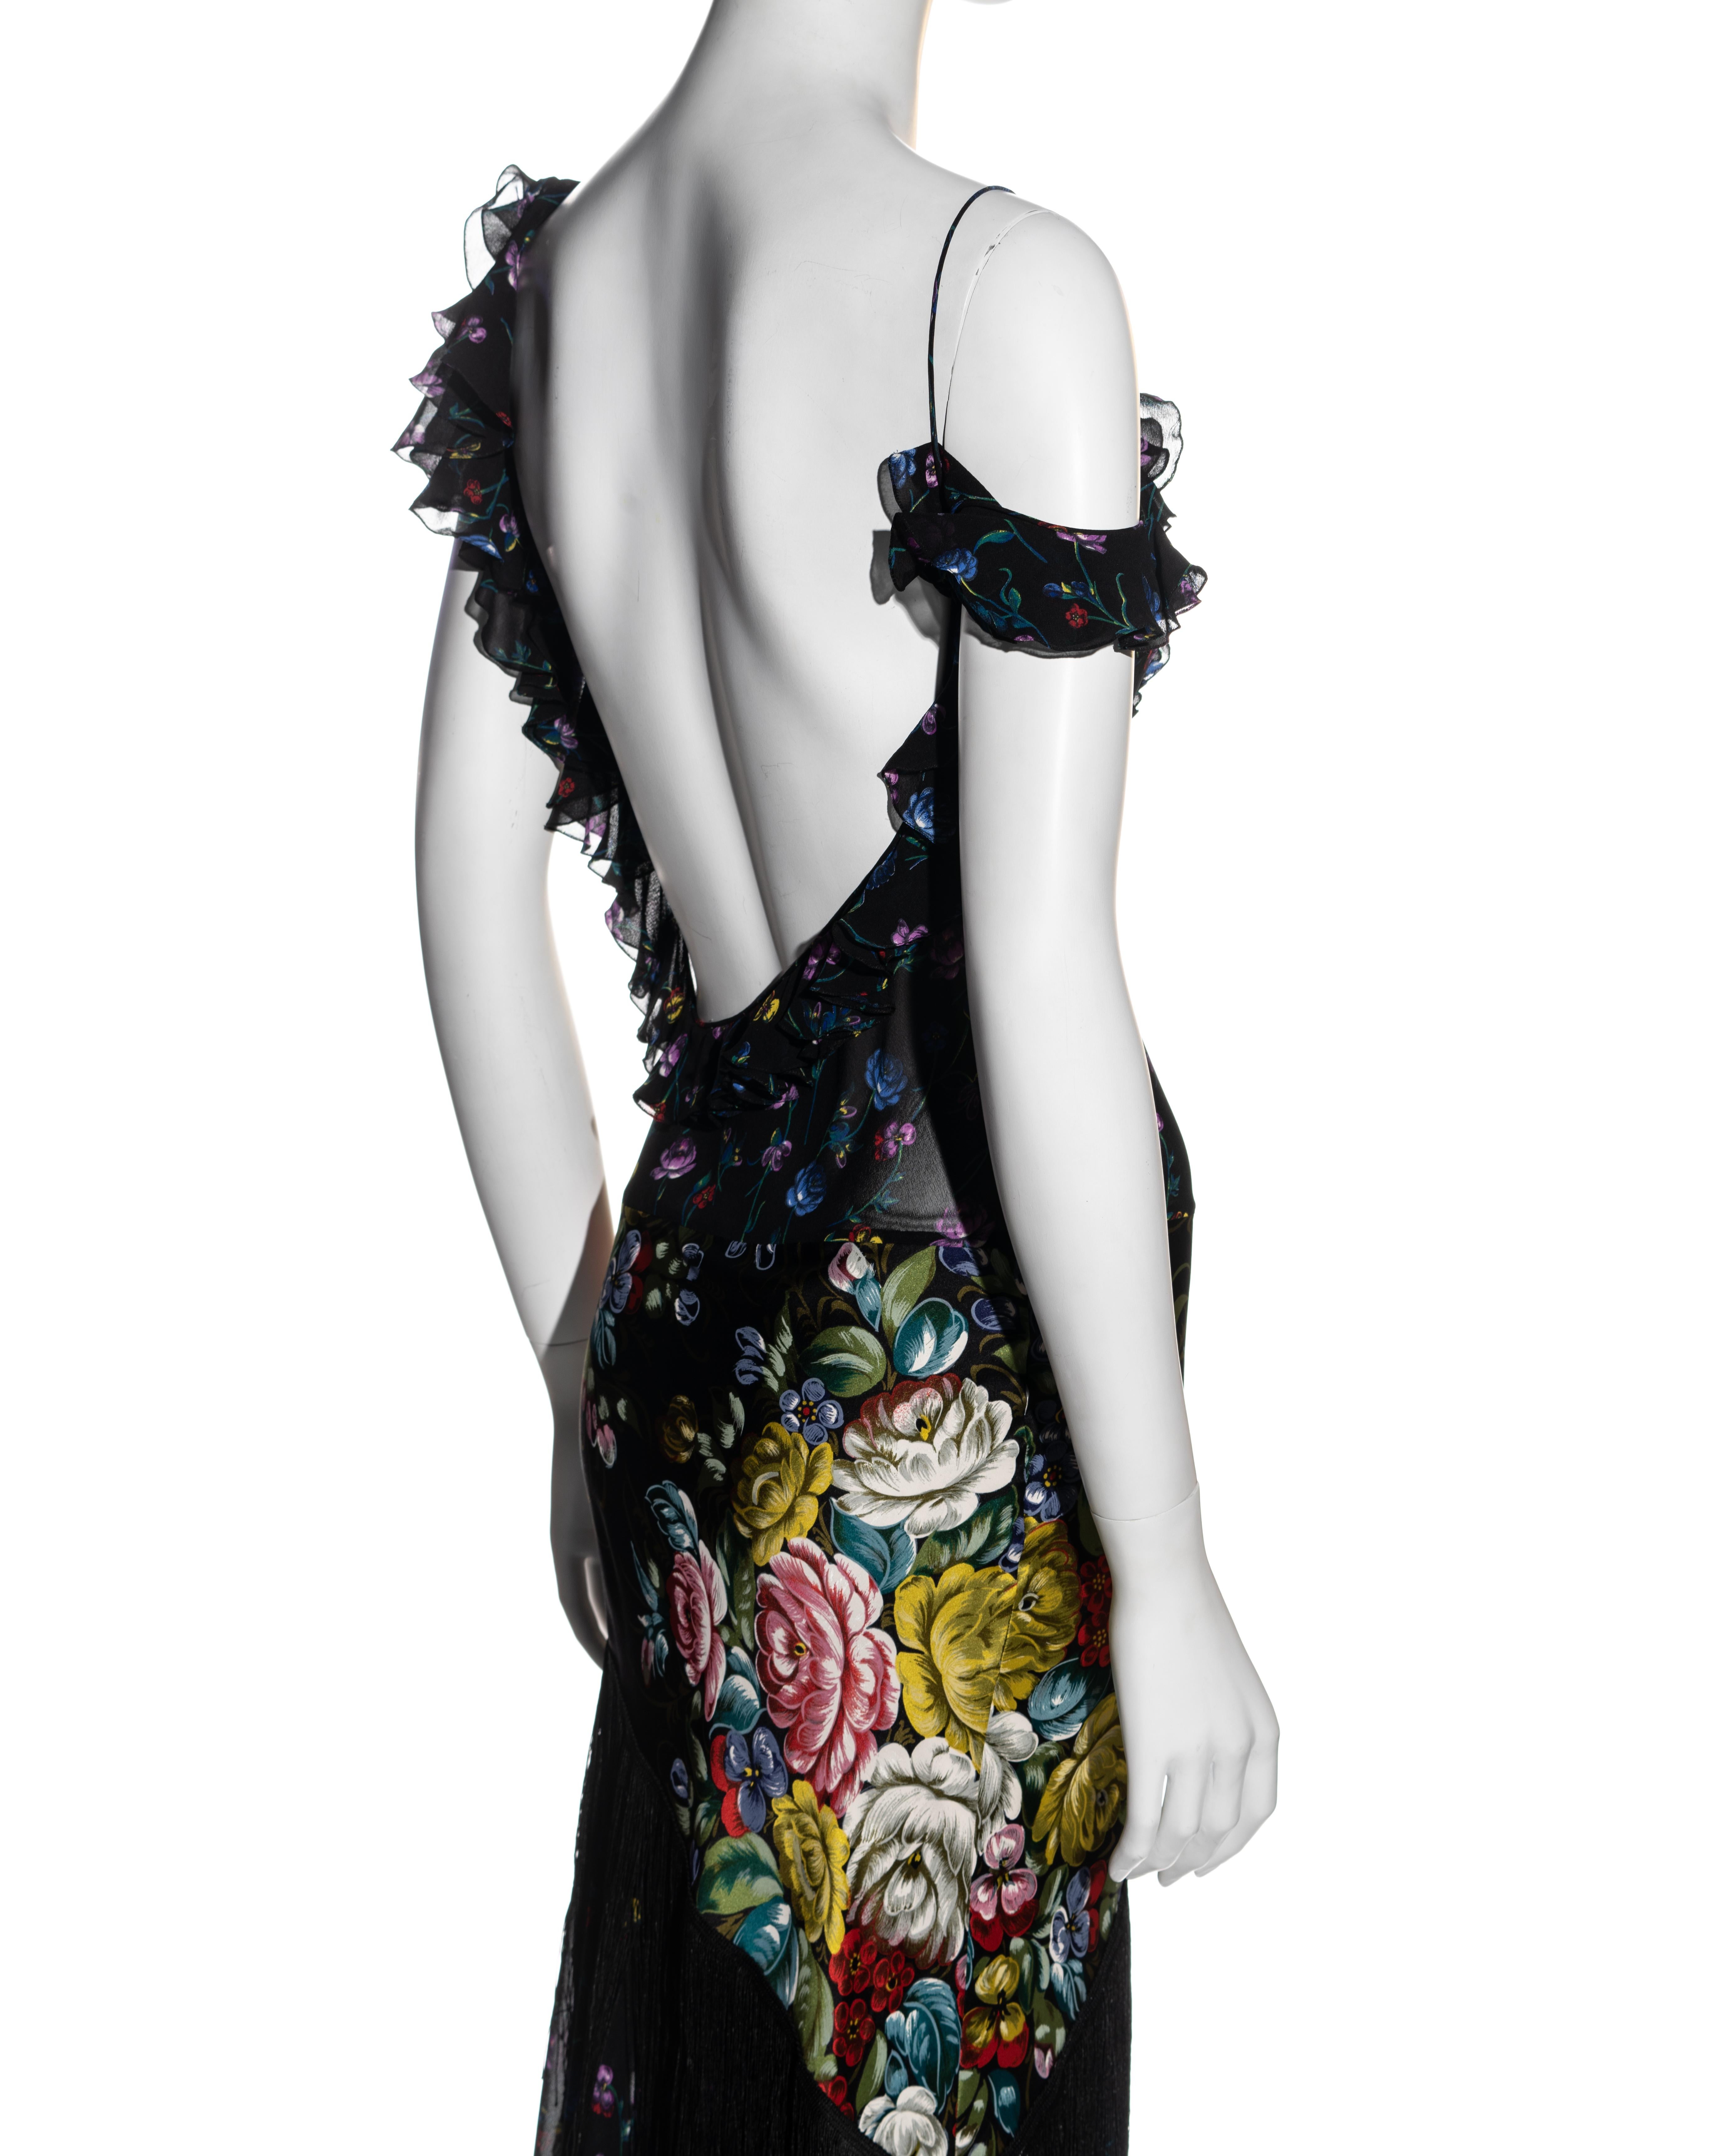 Women's John Galliano floral silk low back evening dress with fringed skirt, ss 1997